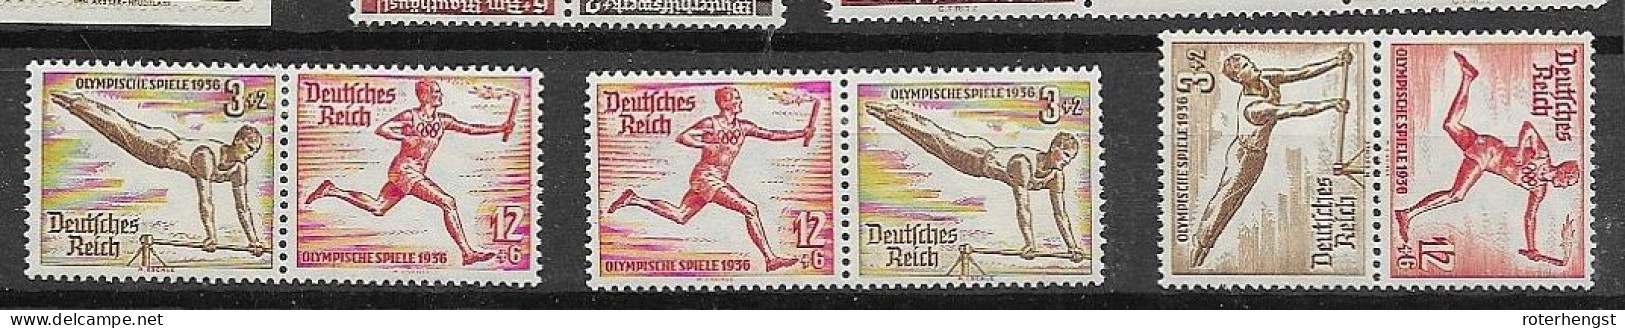 Reich From Booklet Panes 1936 Mlh *  And Mnh ** (right Better Pair) 44 Euros - Booklets